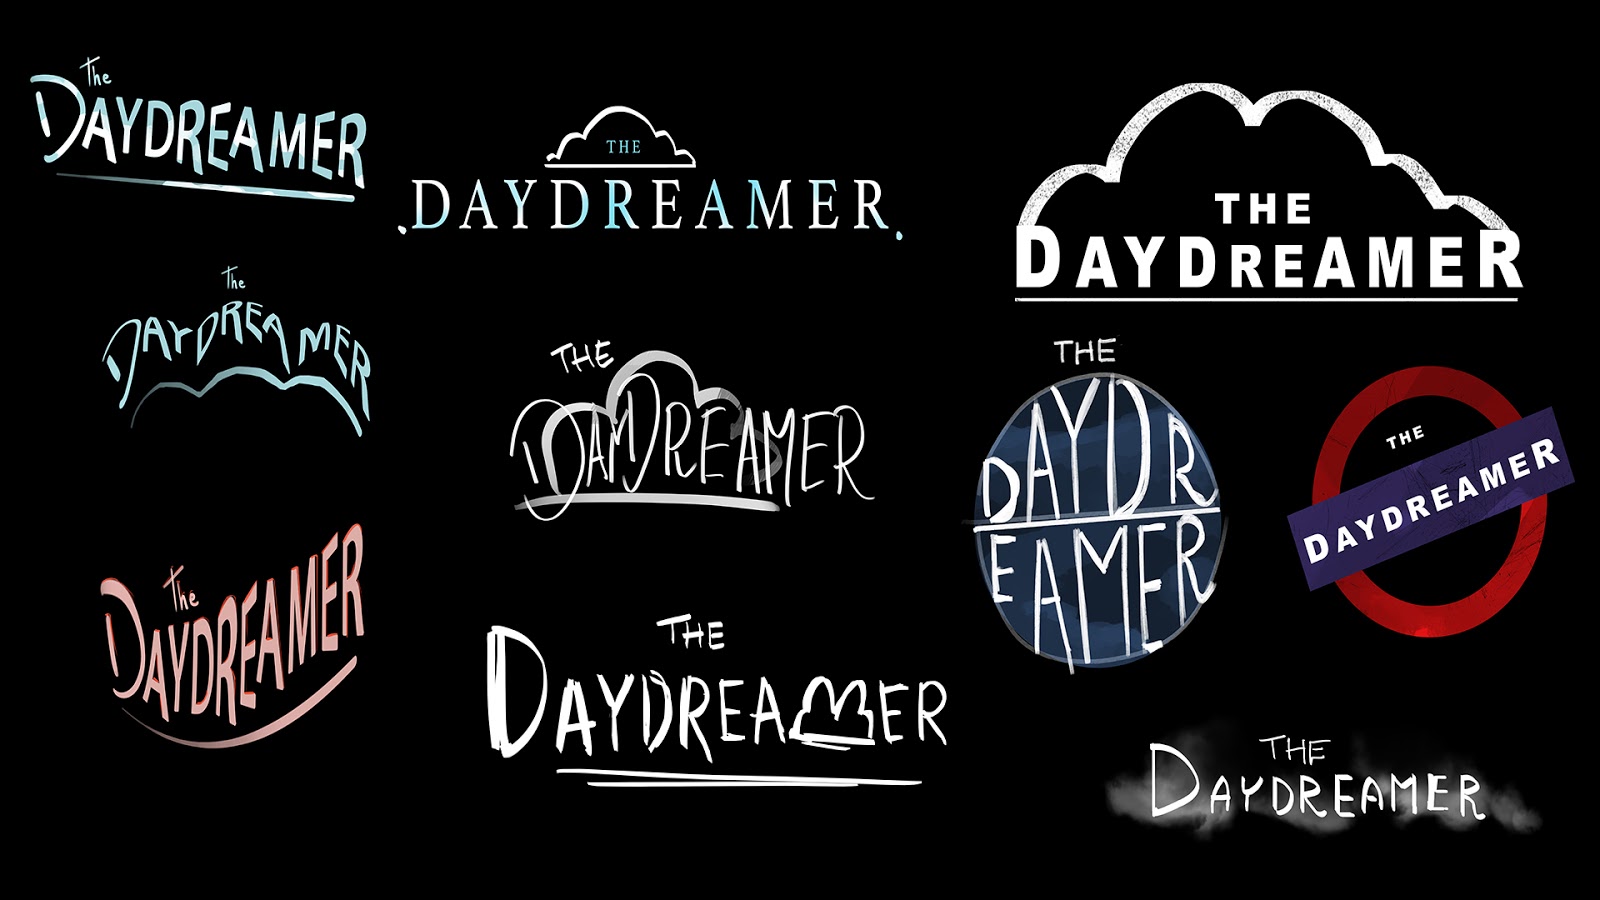 Sam Cannon: "The Daydreamer" Title Font Ideas